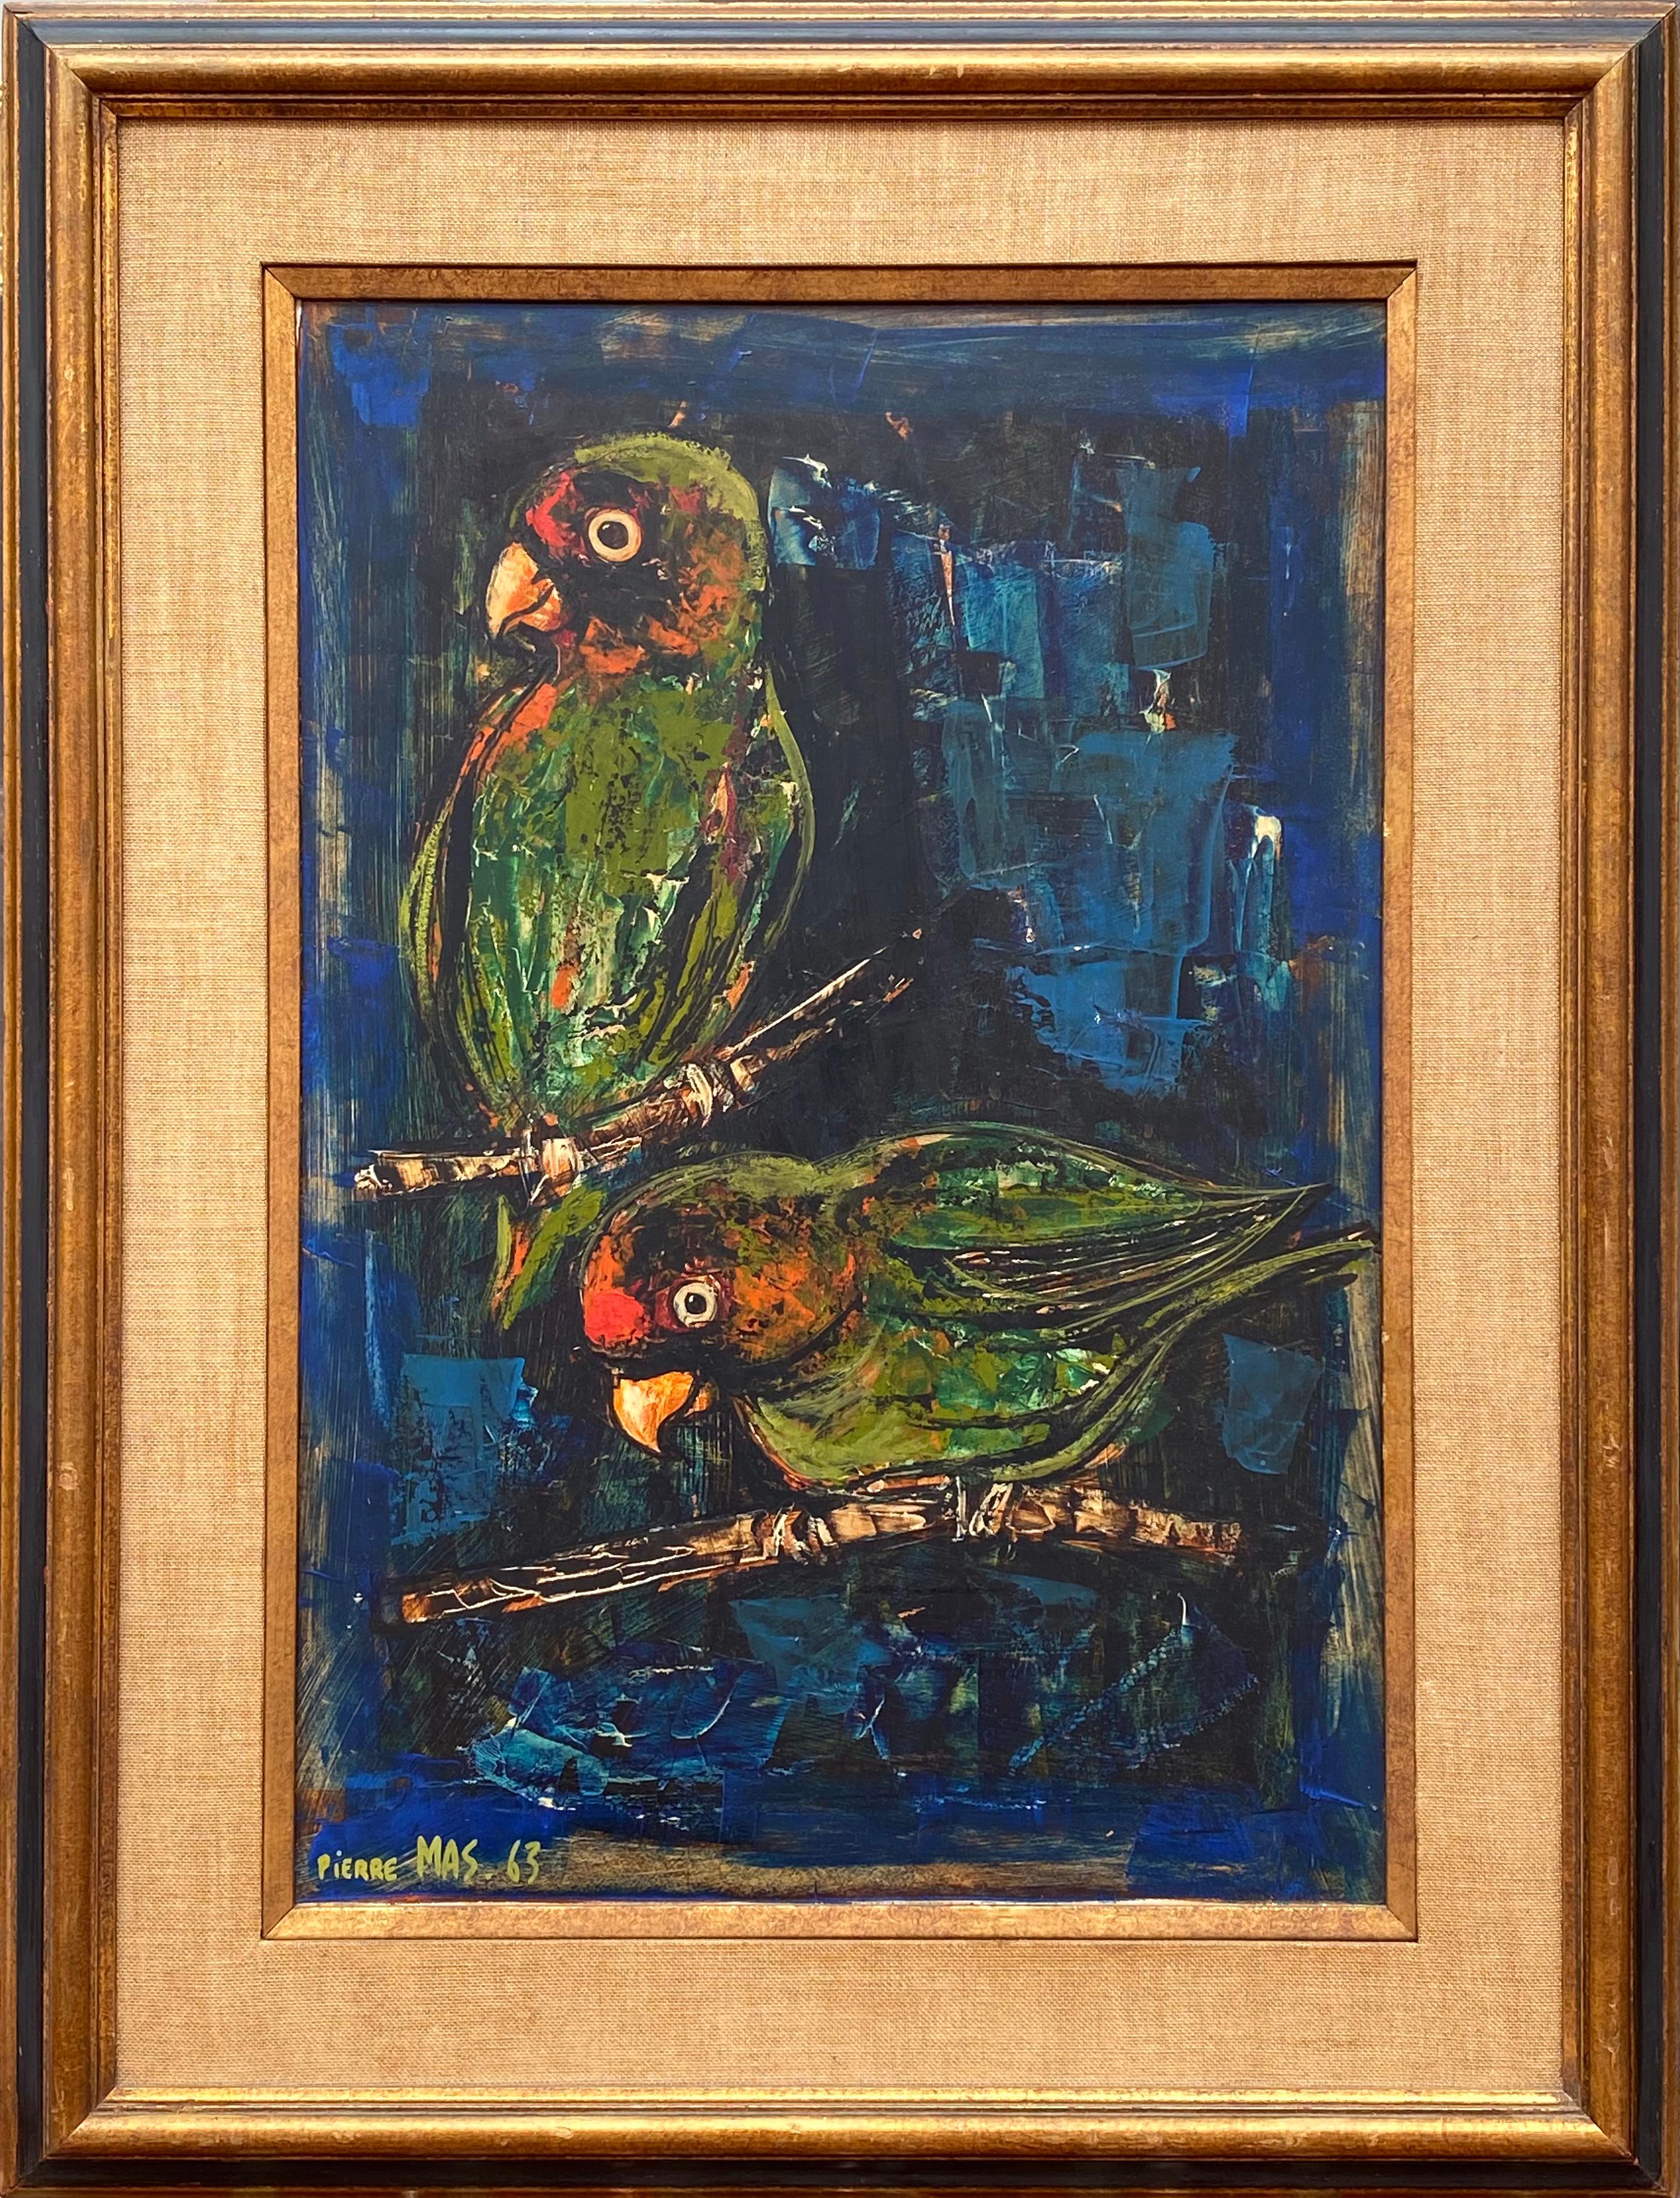 “Parrots” - Painting by Pierre Mas 